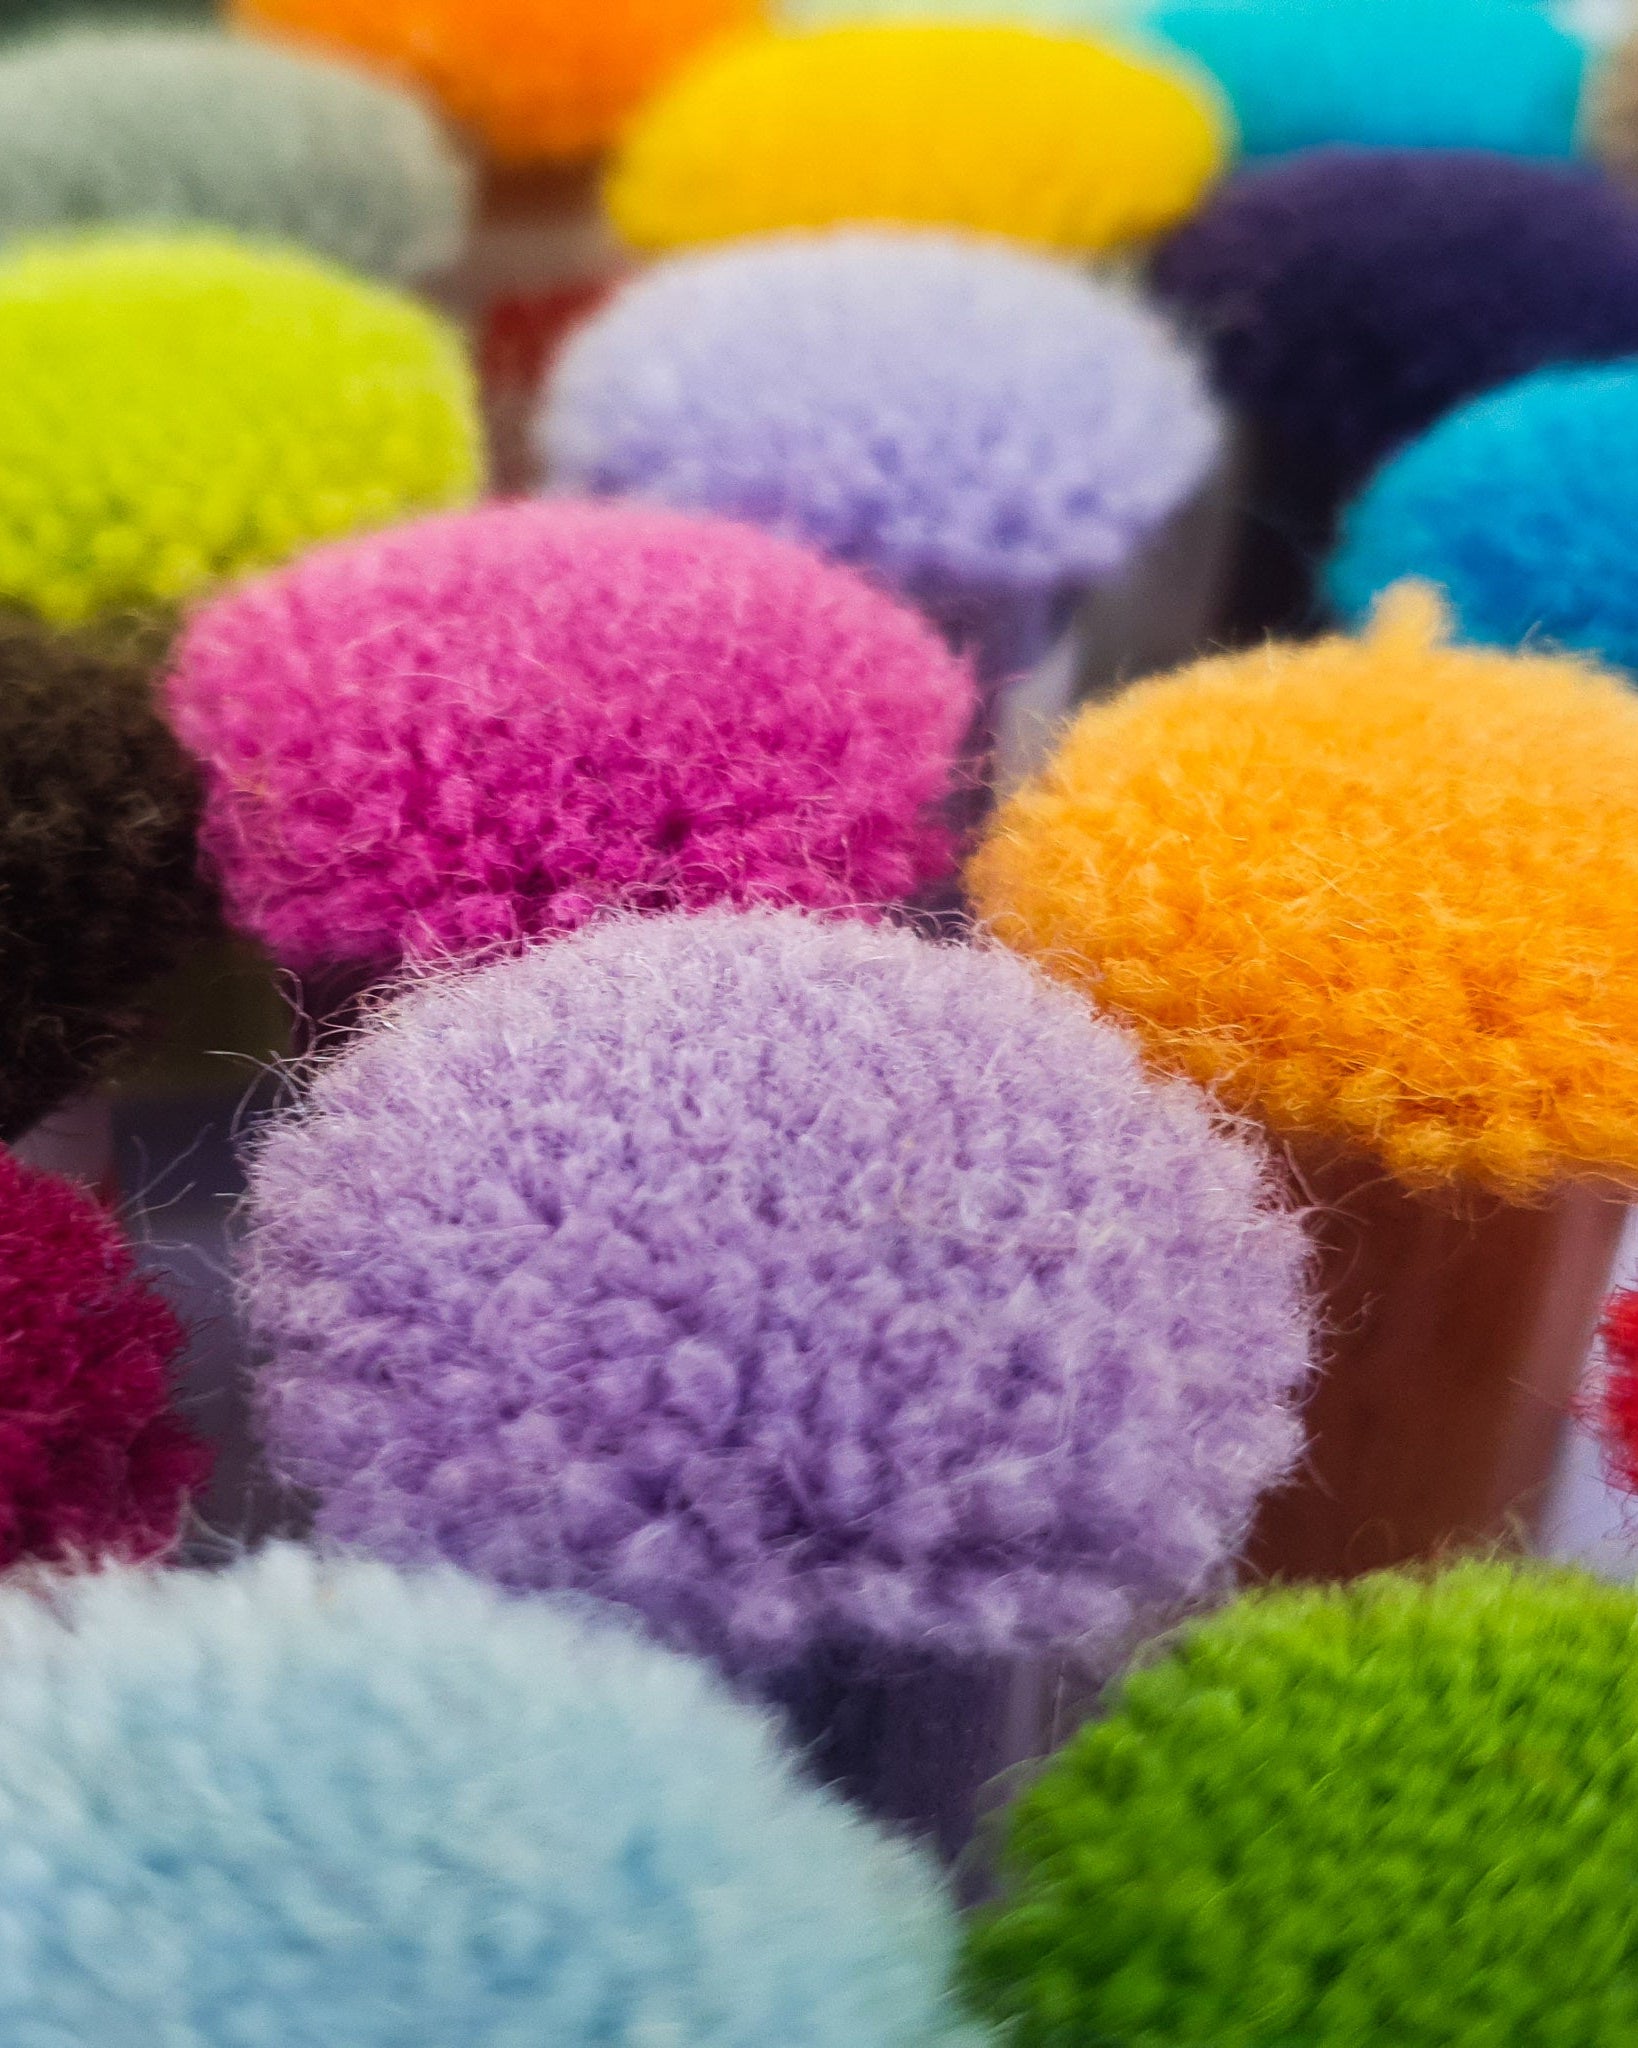 colourful pom pom swatches of rug wool